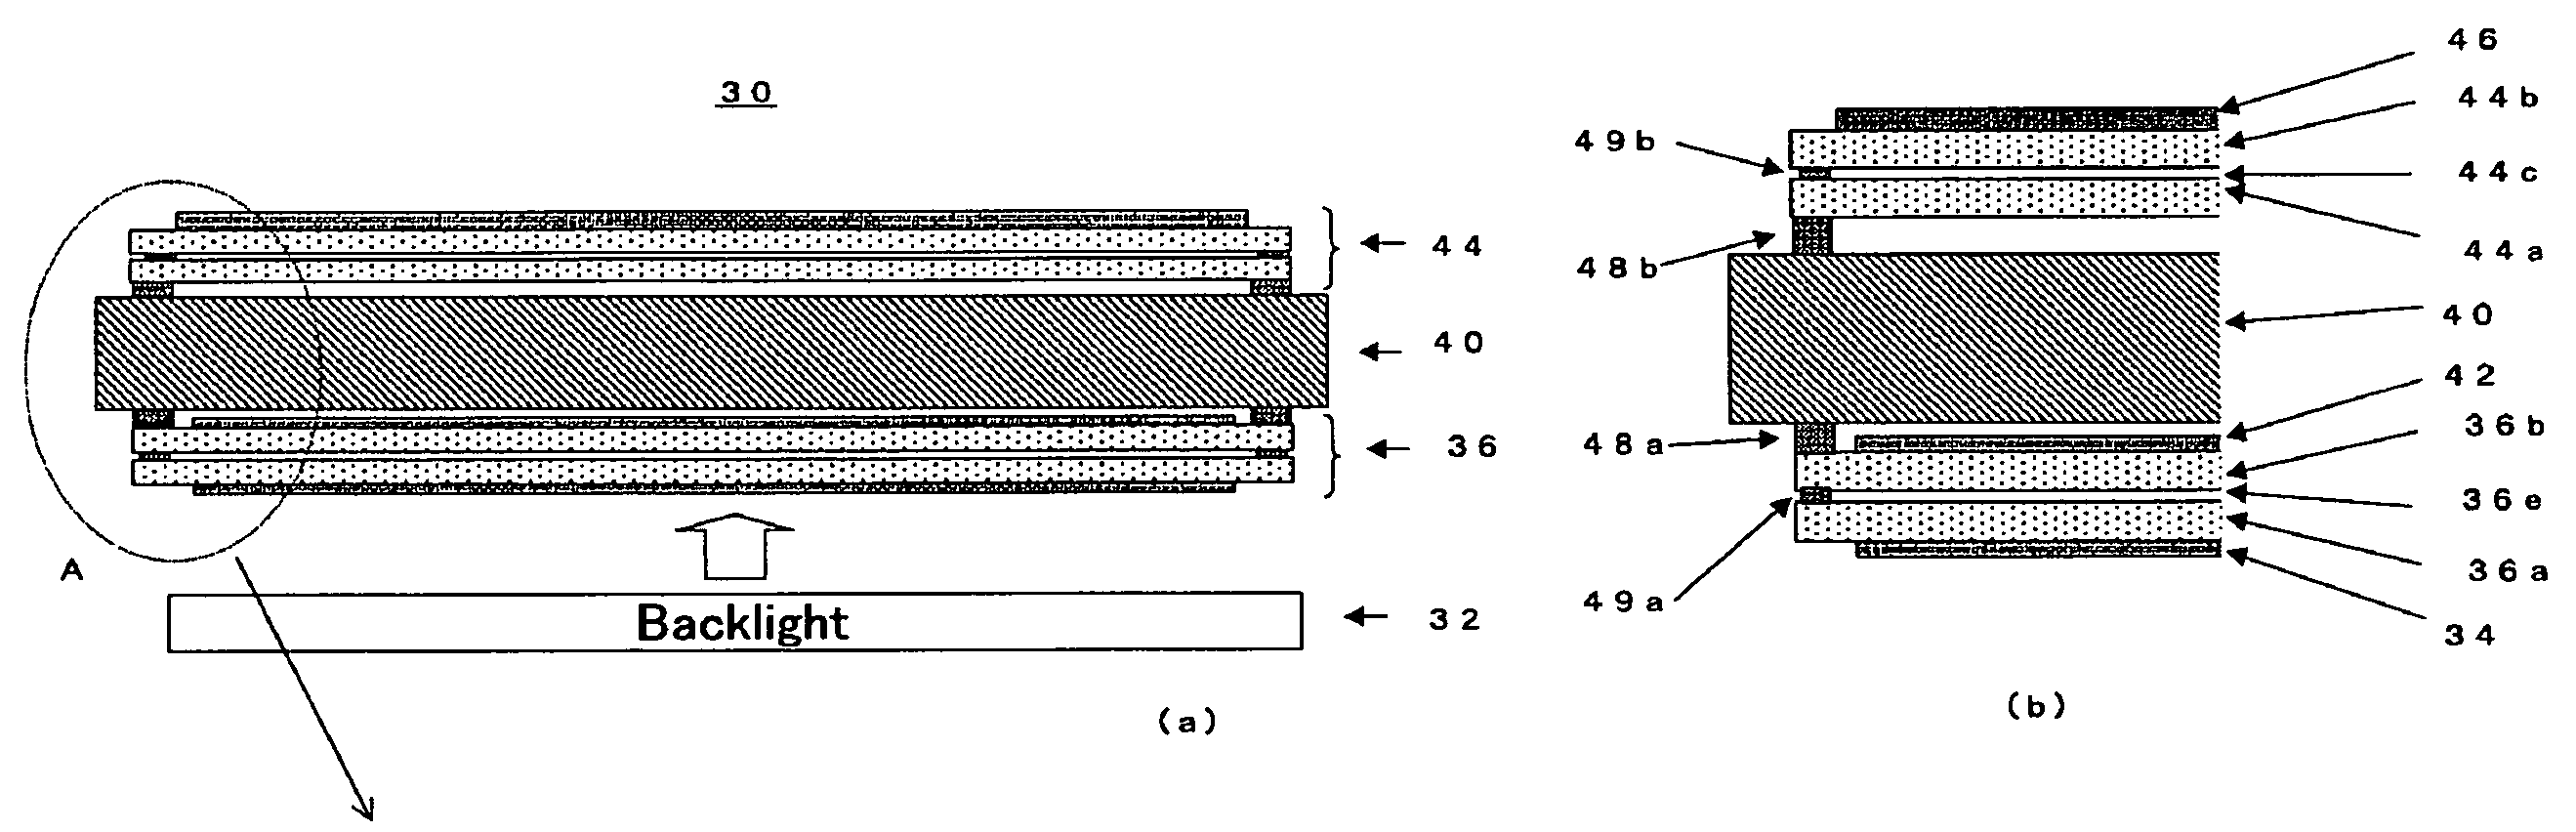 Stereoscopic image display device having negative pressure regions within